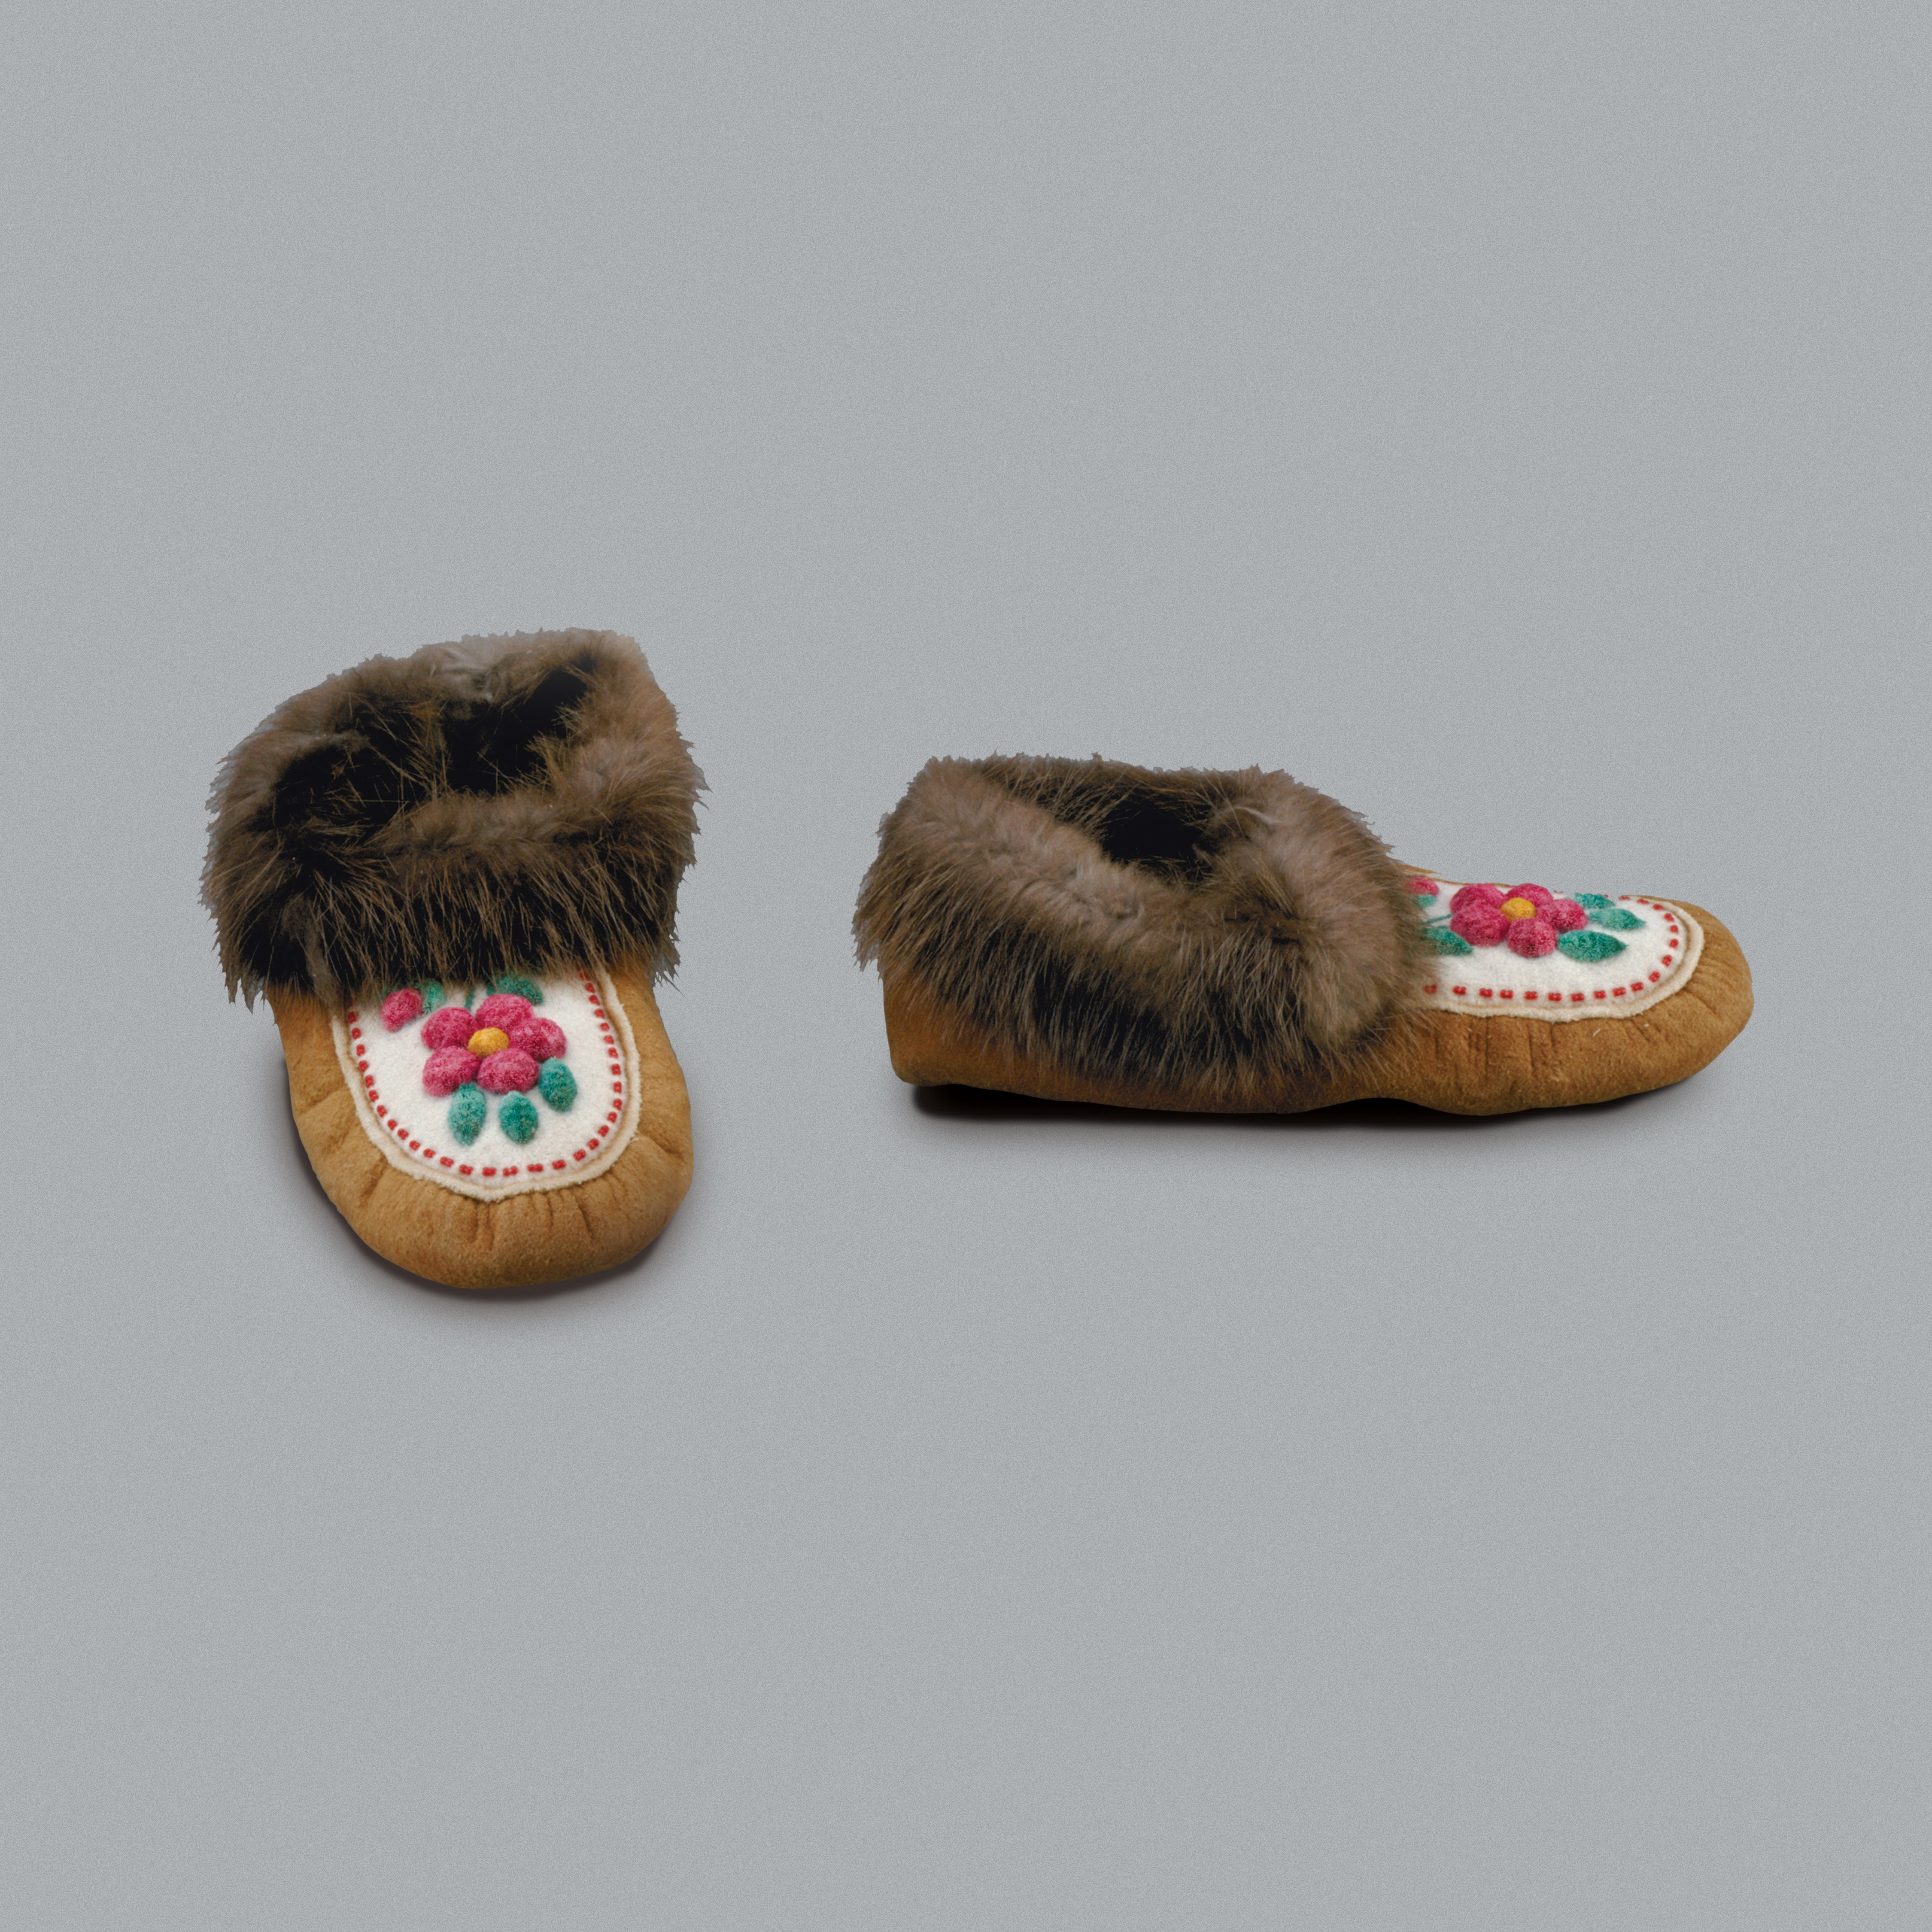 11orignal, poil, peau, broderie, touffetage, Autochtone, artiste Moose hair tufted flower design on the vamp of moccasins